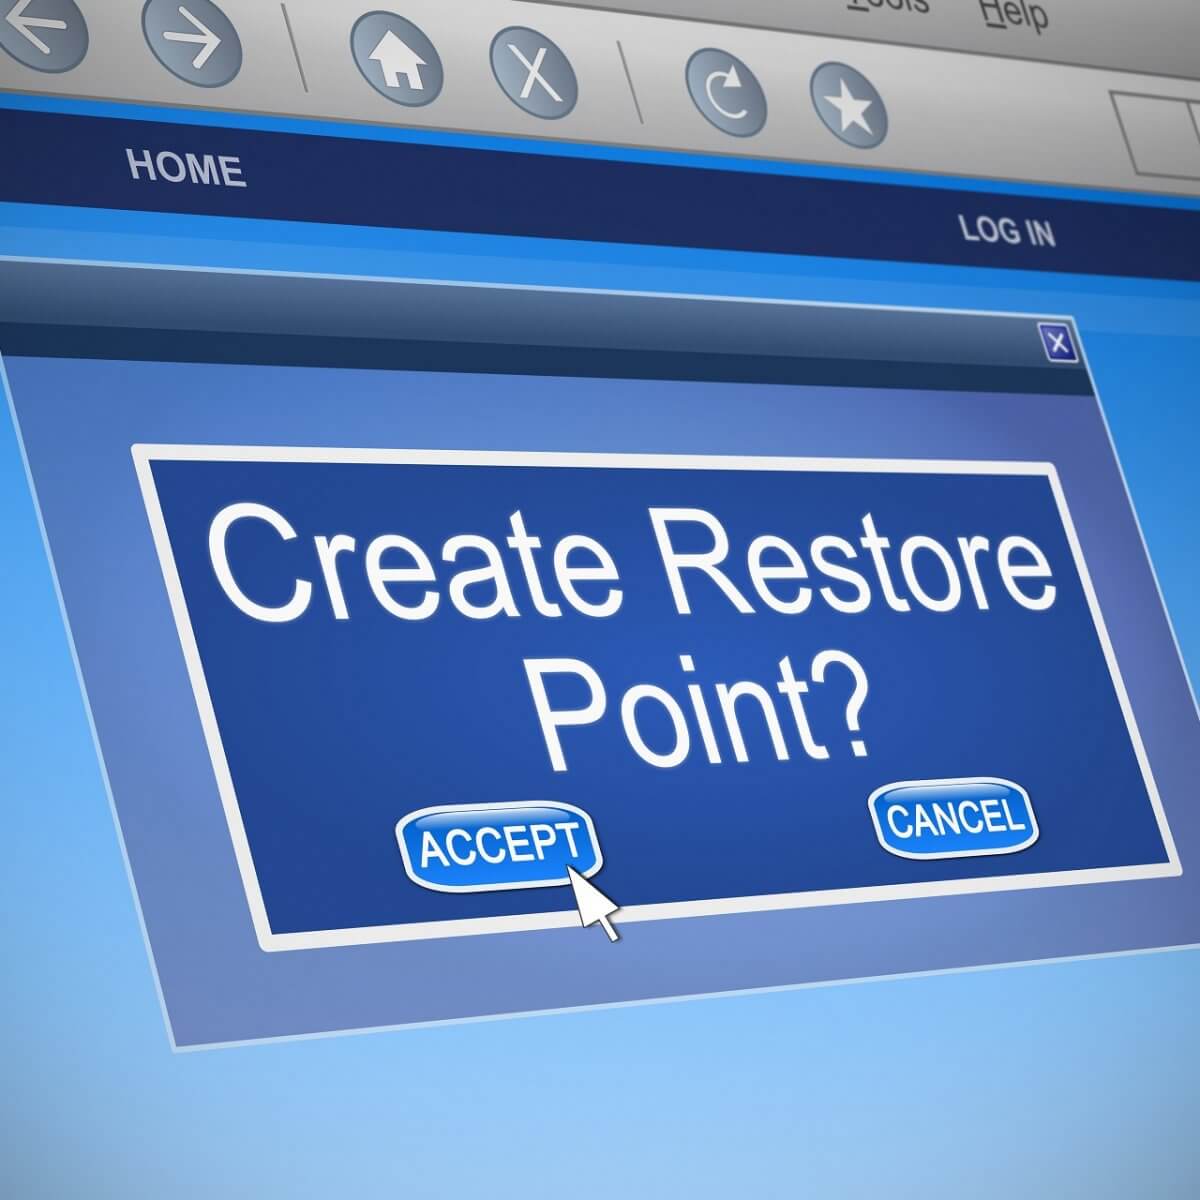 persist applications through system recovery windows 10